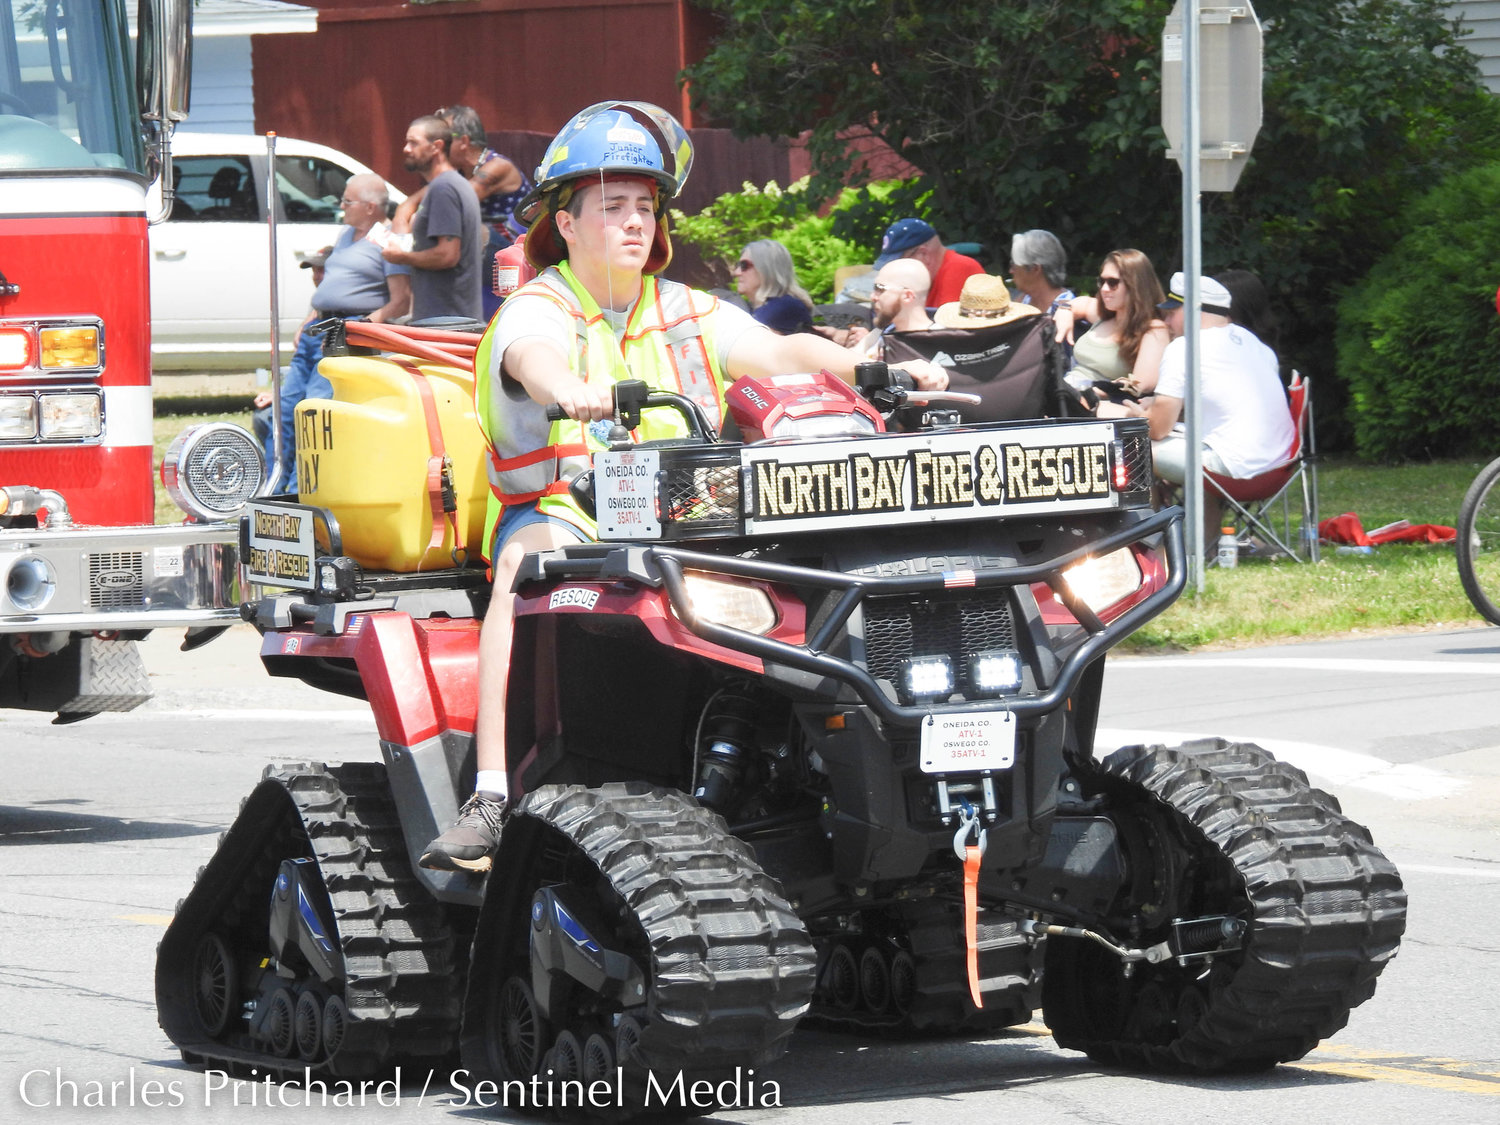 The Sylvan Beach Pirate's Parade makes its way down Main Street. Pictured is a North Bay Fire Department junior fire fighter, riding one of the department's ATVs equipped with side-by-side tracks.